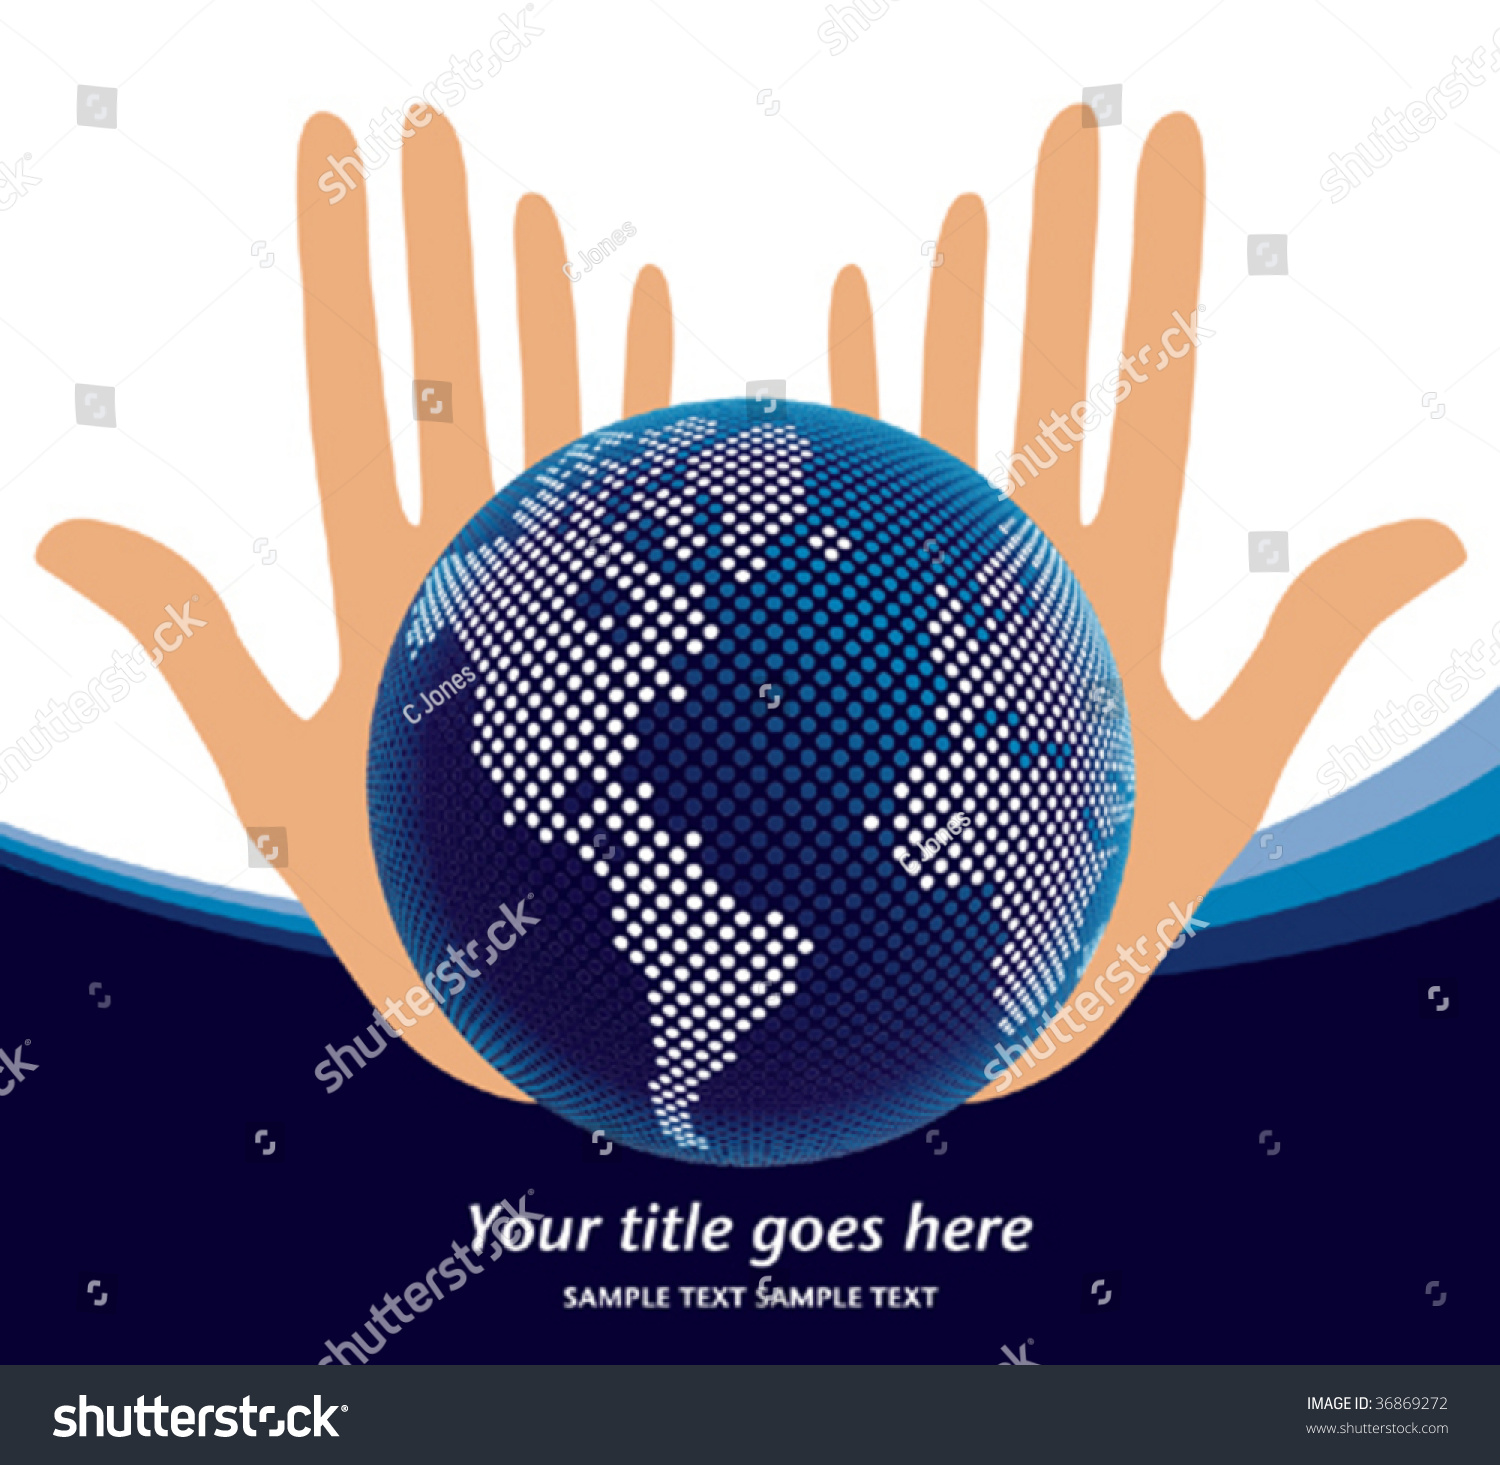 Earths Future Our Hands Vector Stock Vector Royalty Free